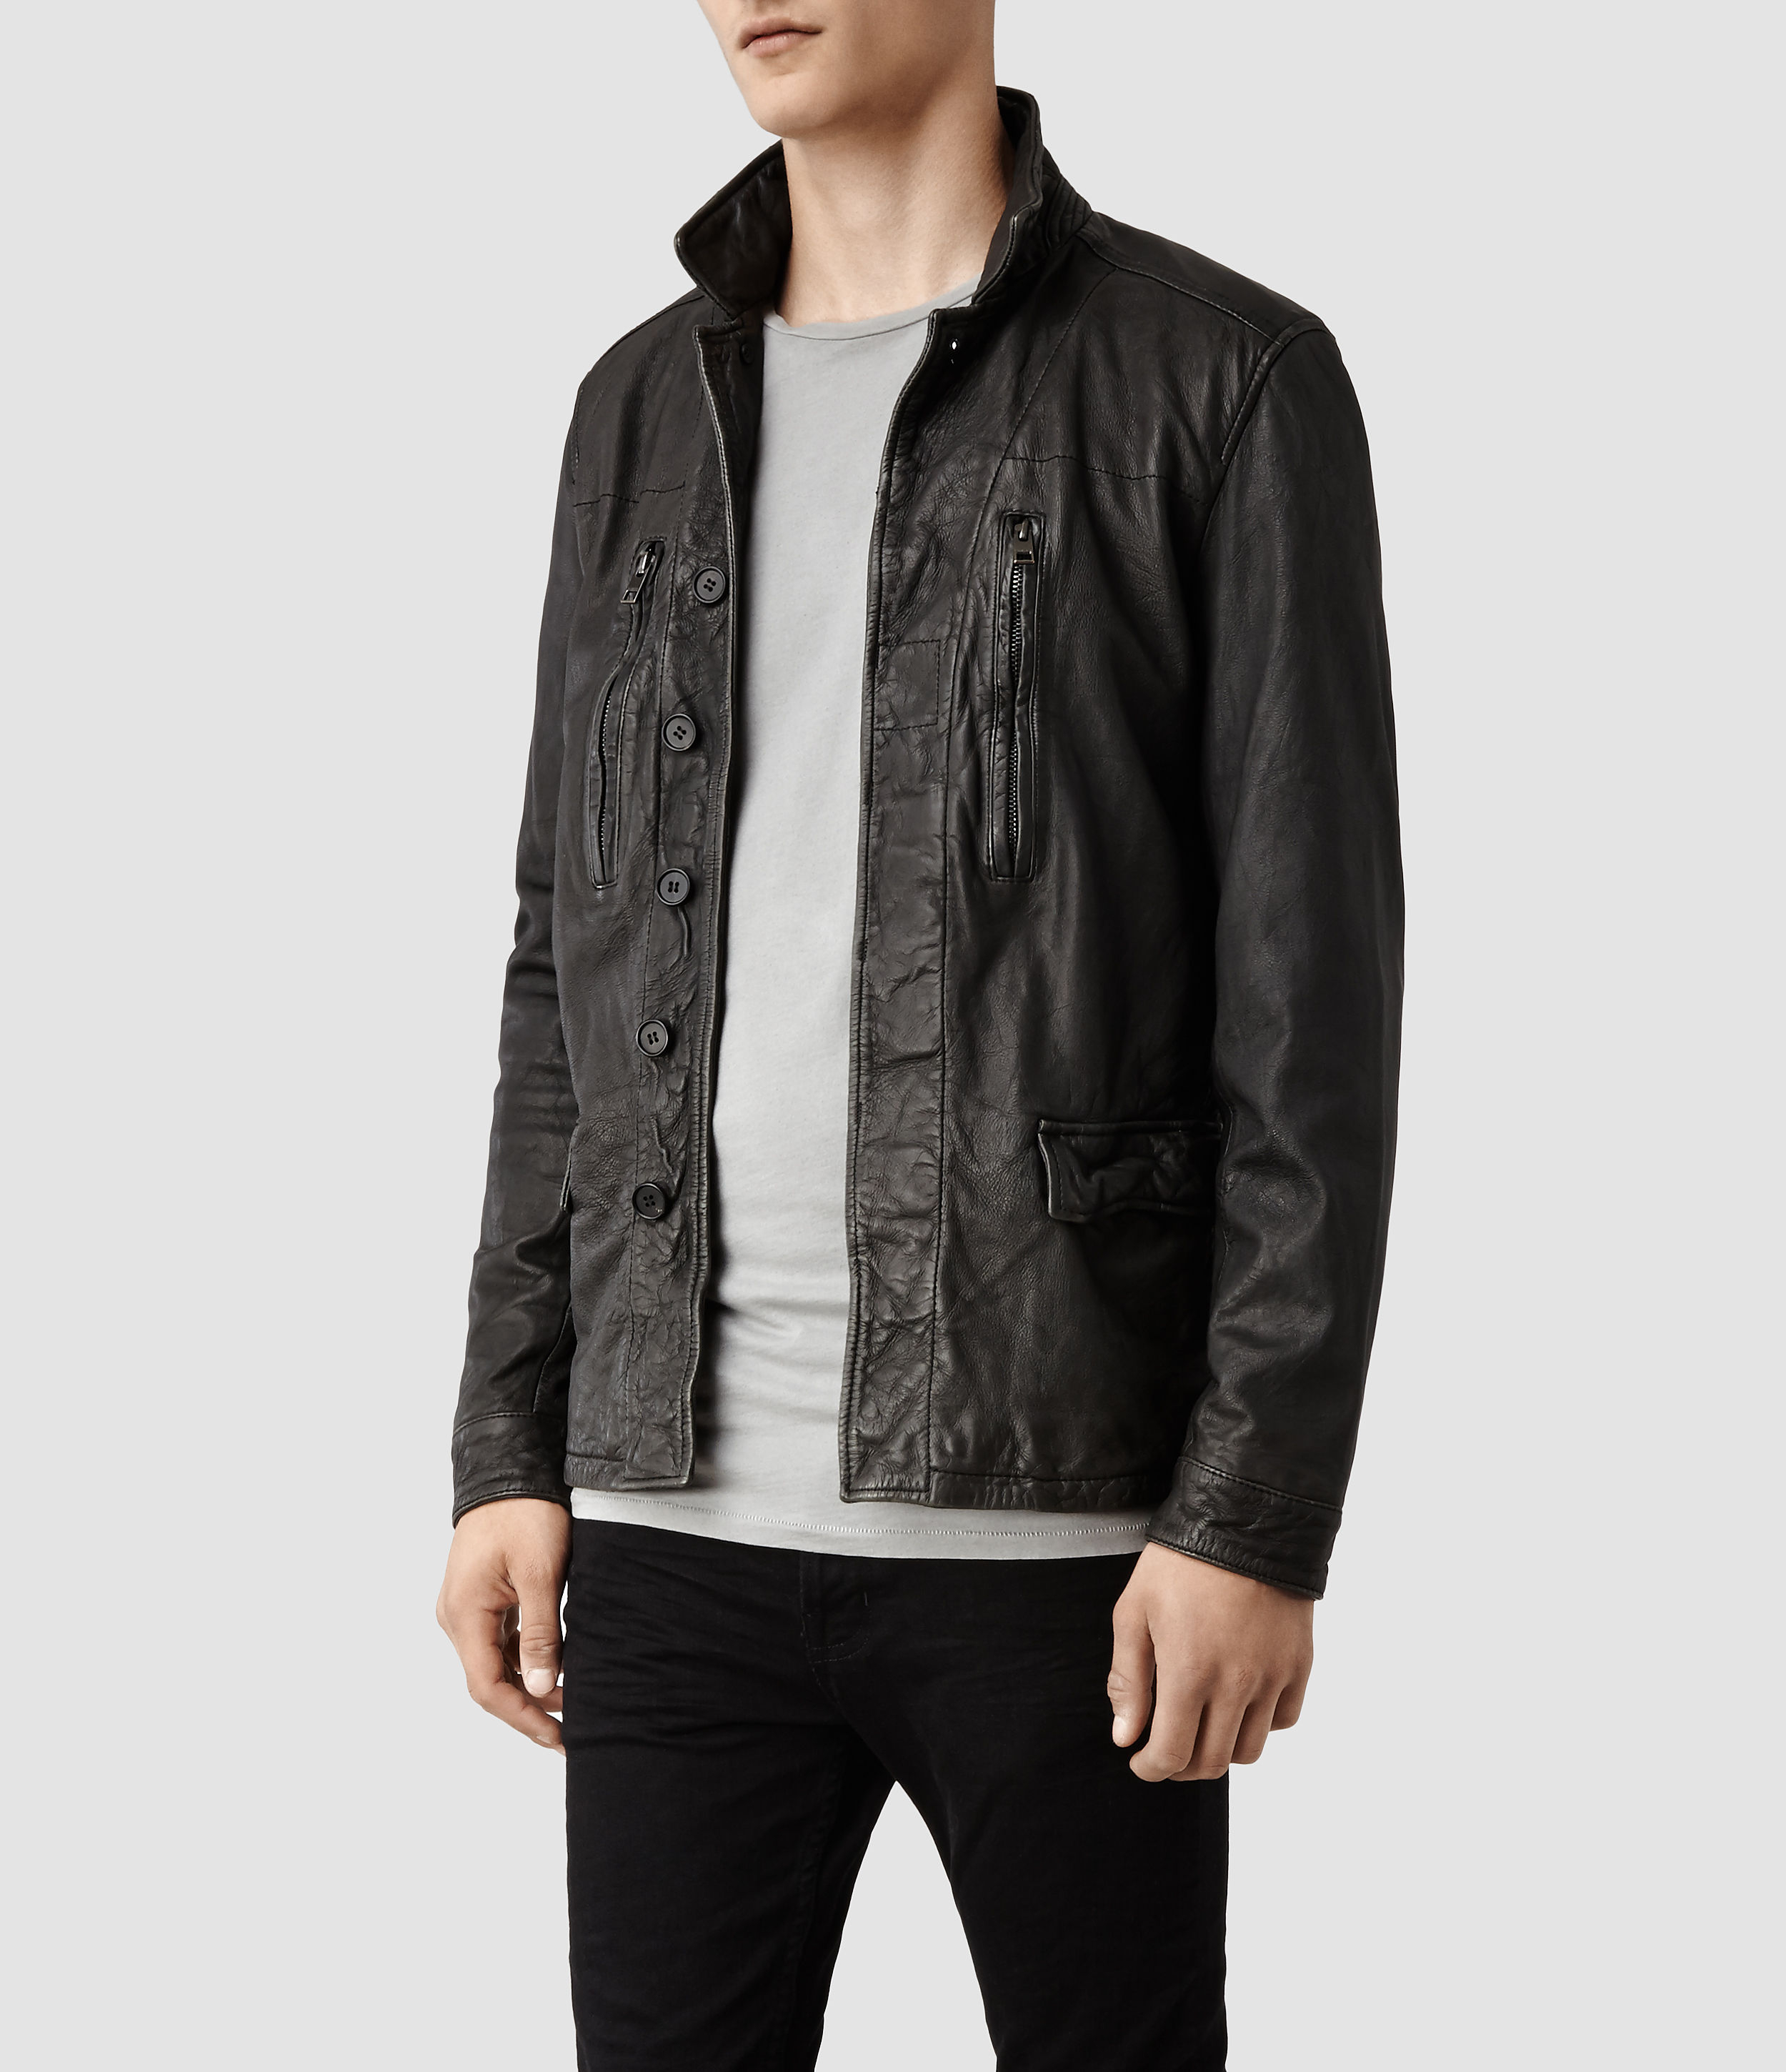 Lyst - Allsaints Melville Leather Jacket in Gray for Men